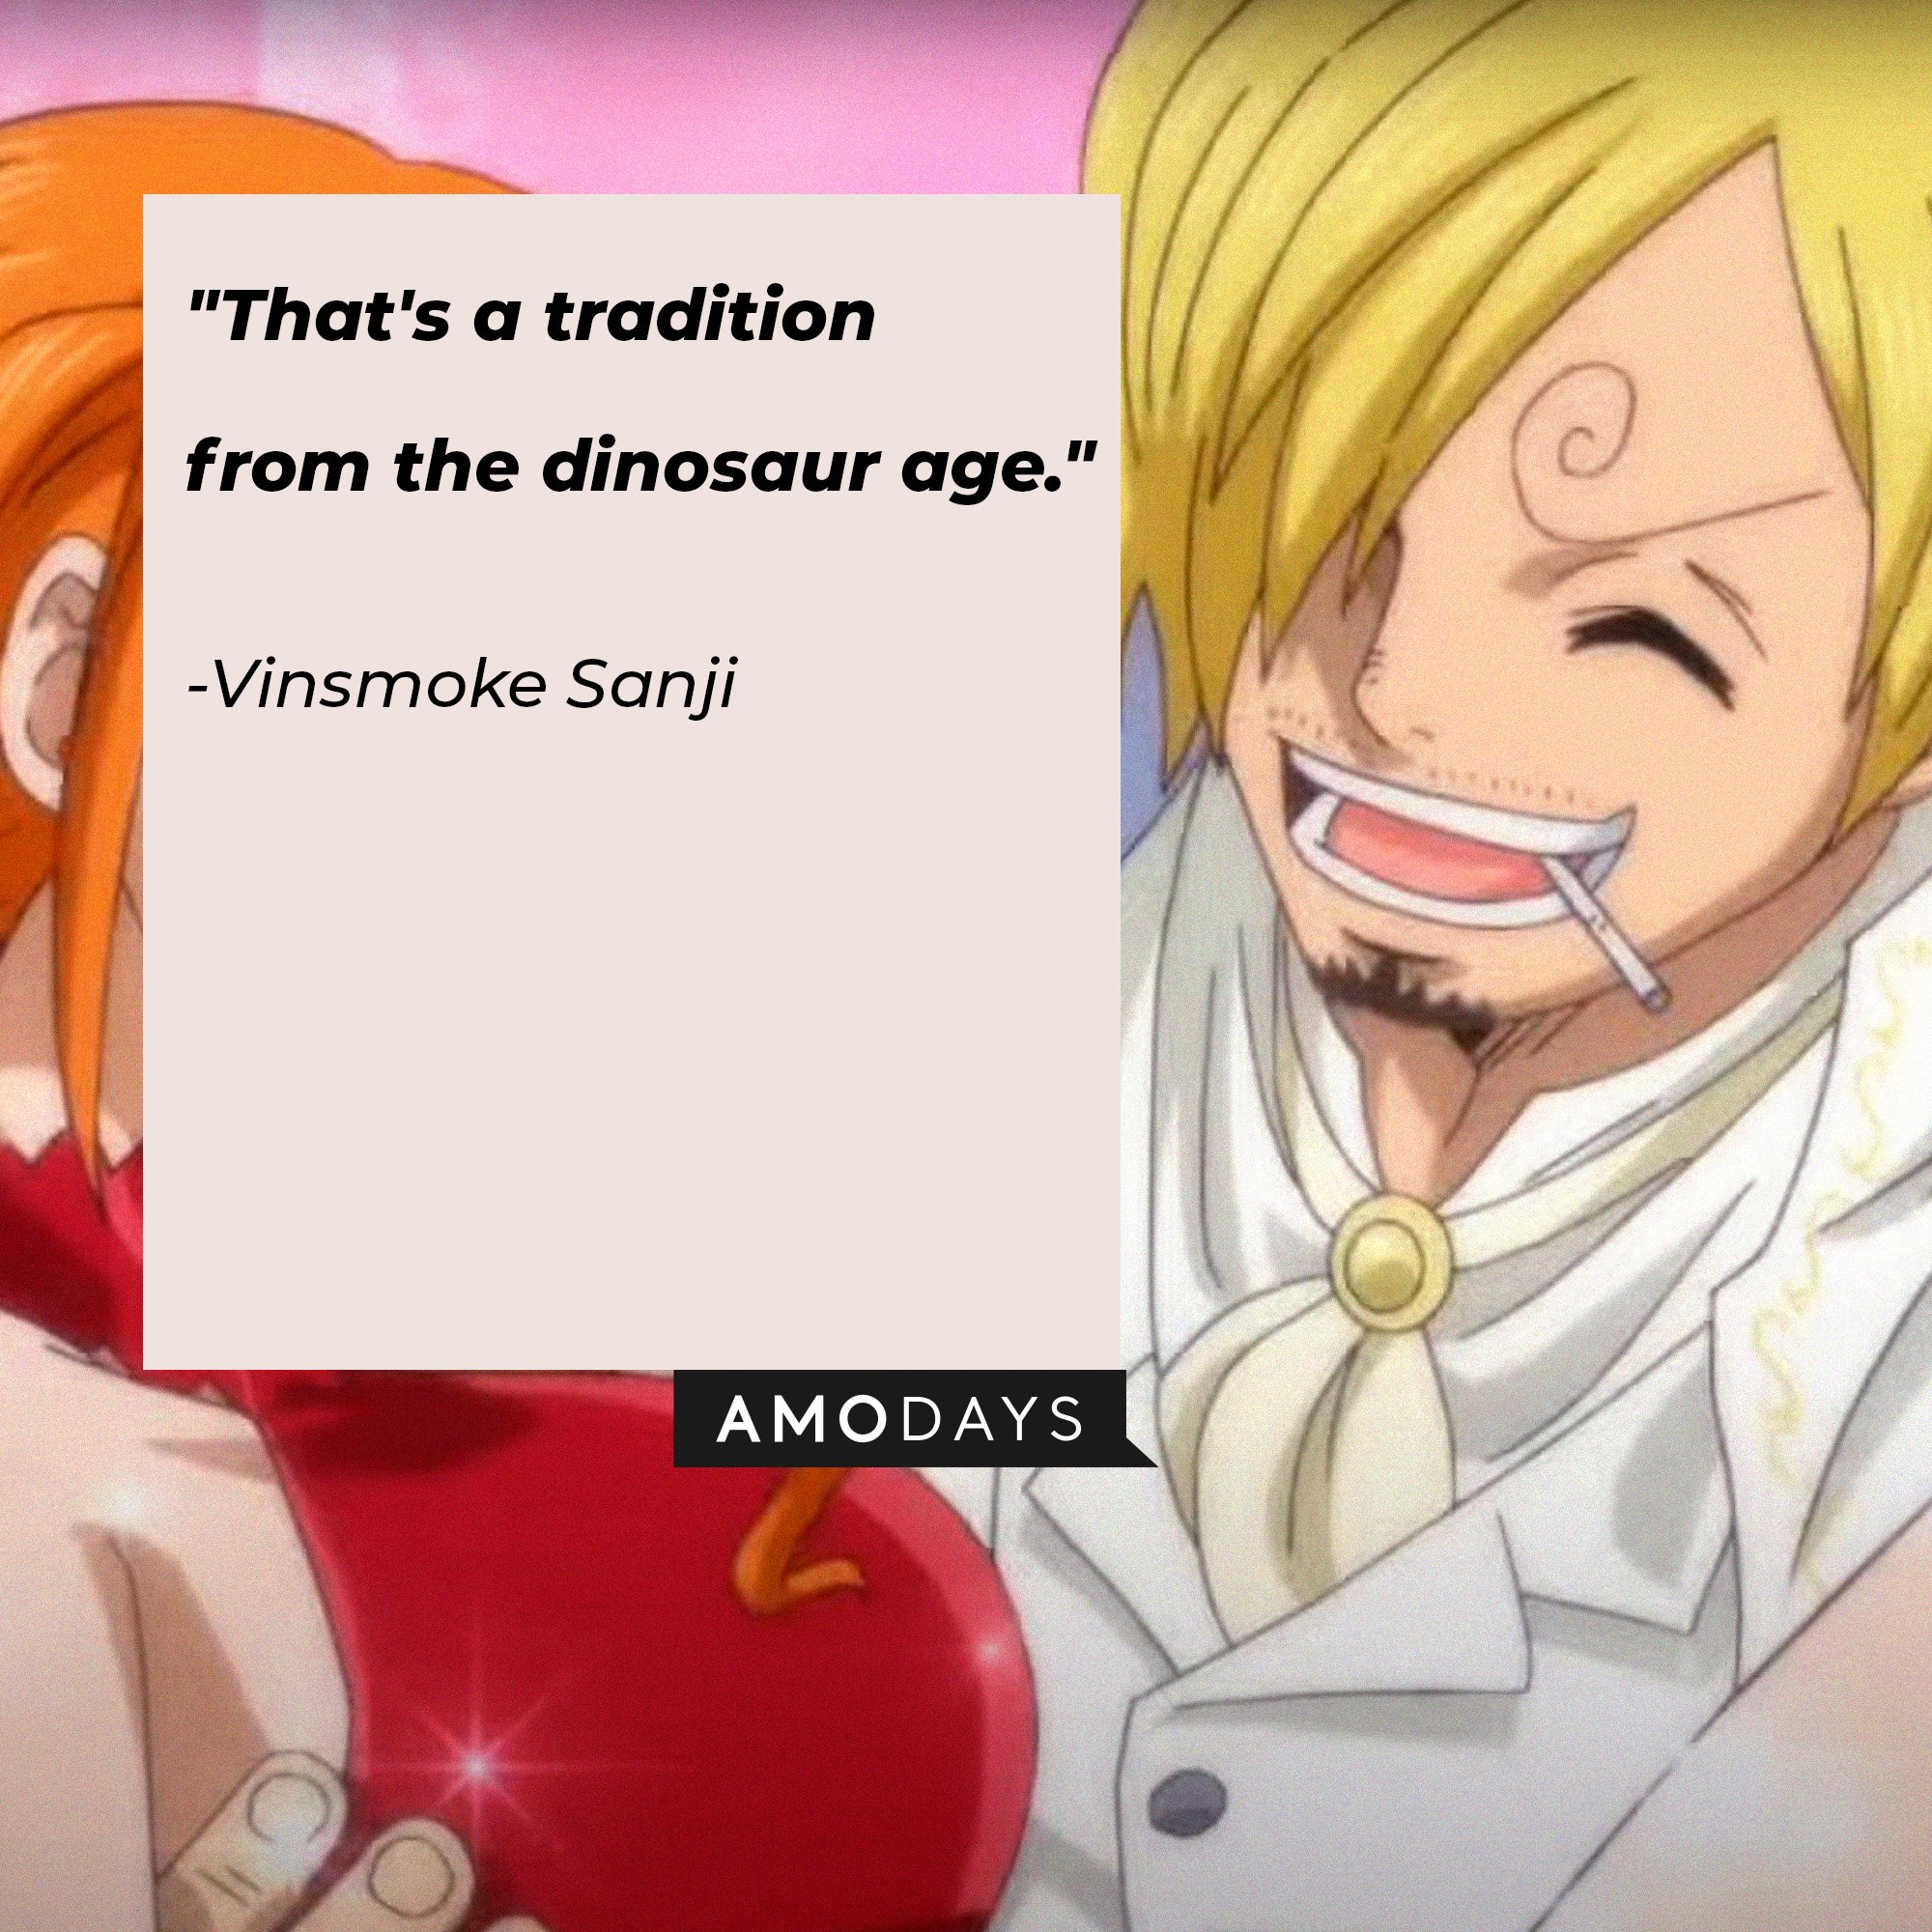 Vinsmoke Sanji's quote: "That's a tradition from the dinosaur age." | Image: AmoDays